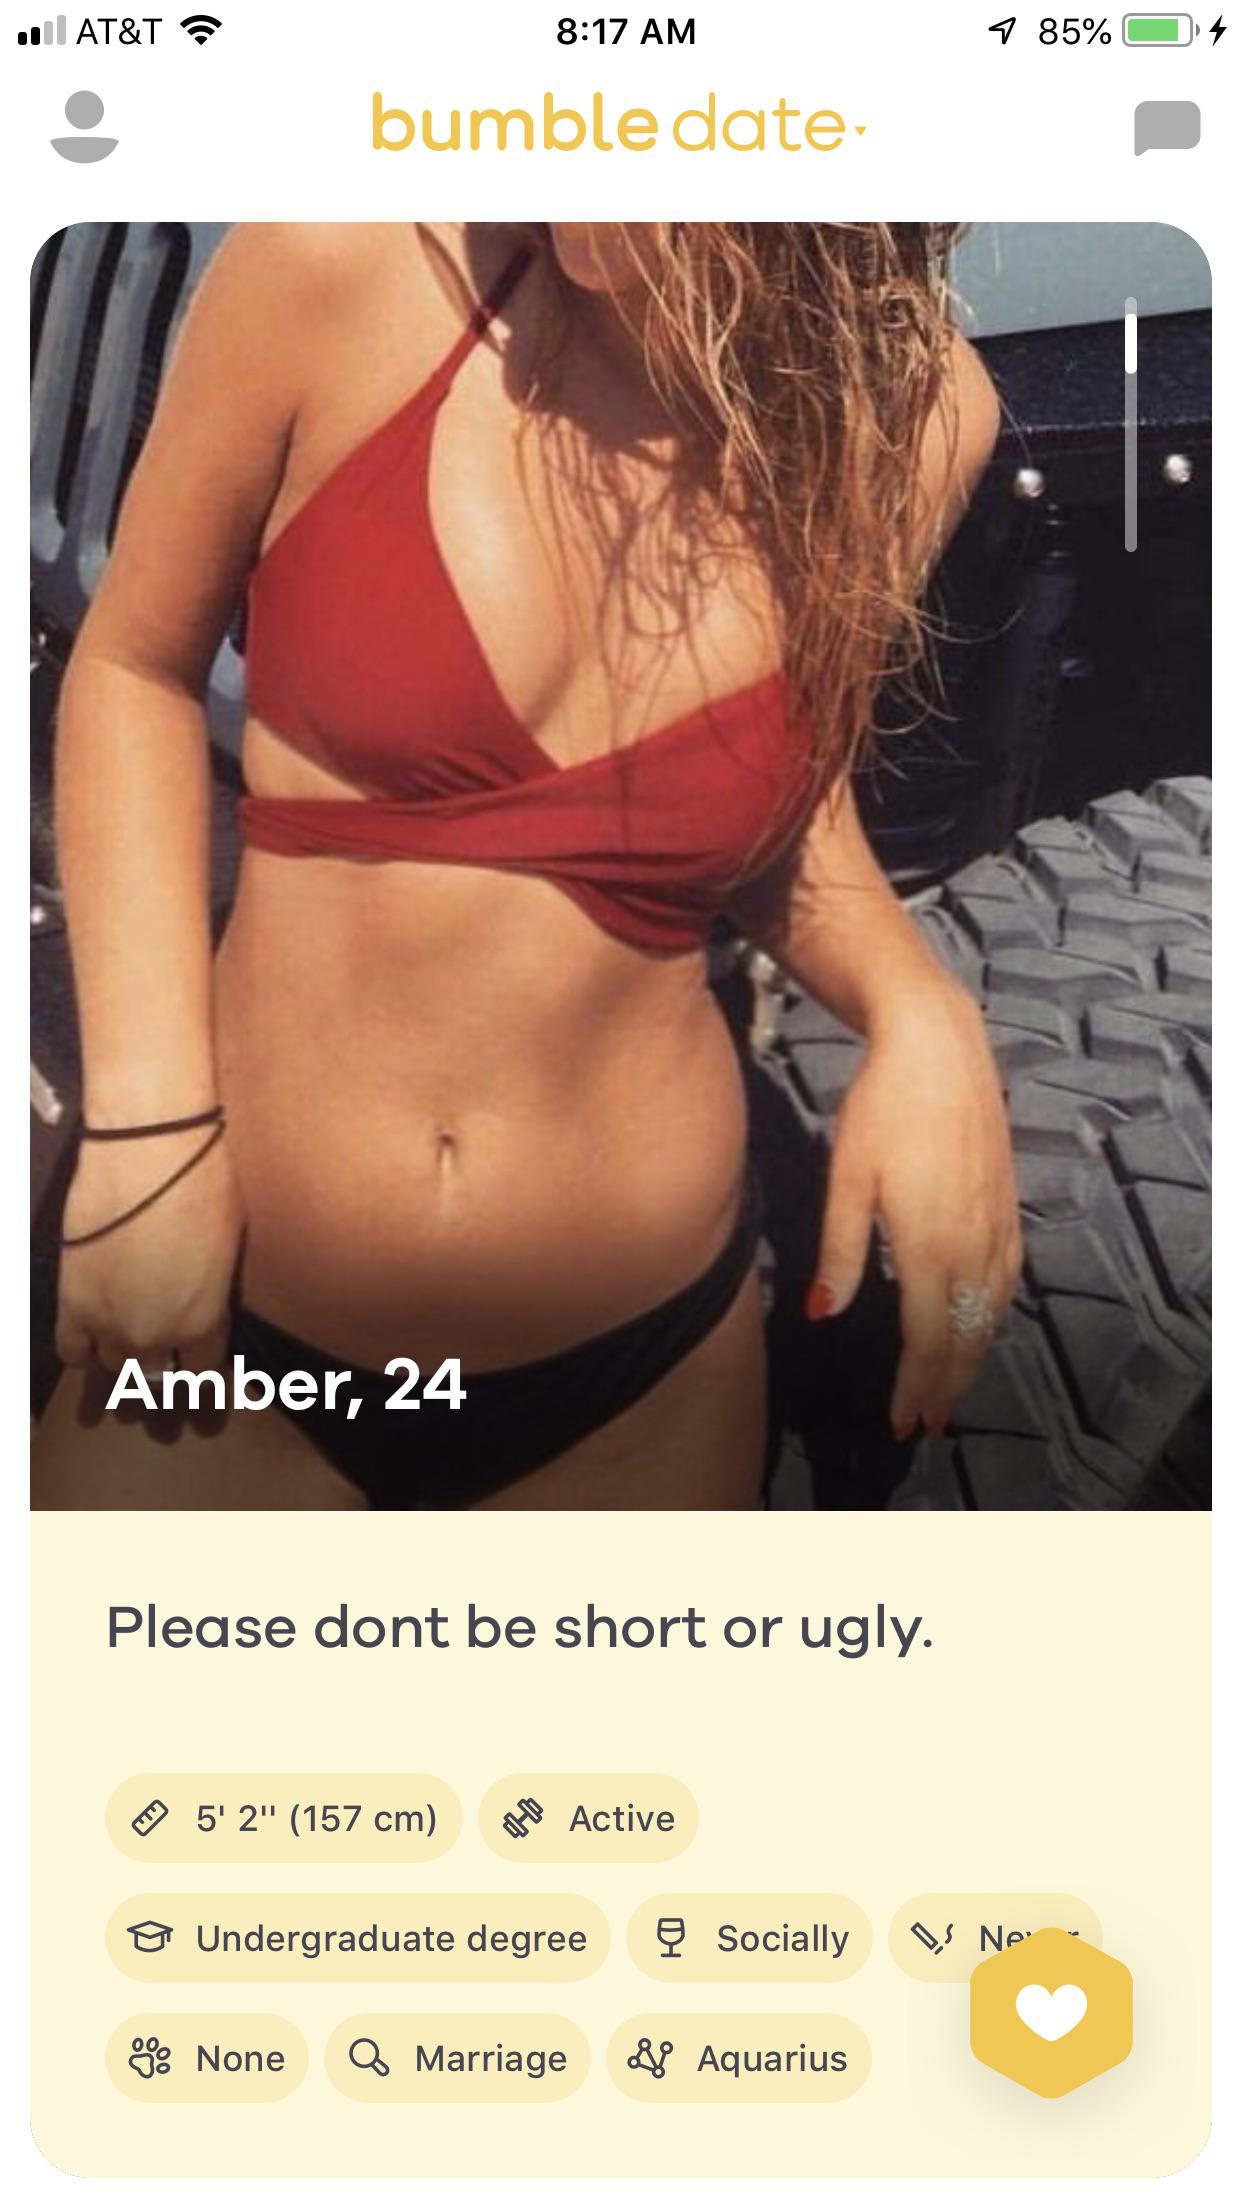 Please dont be short or ugly.